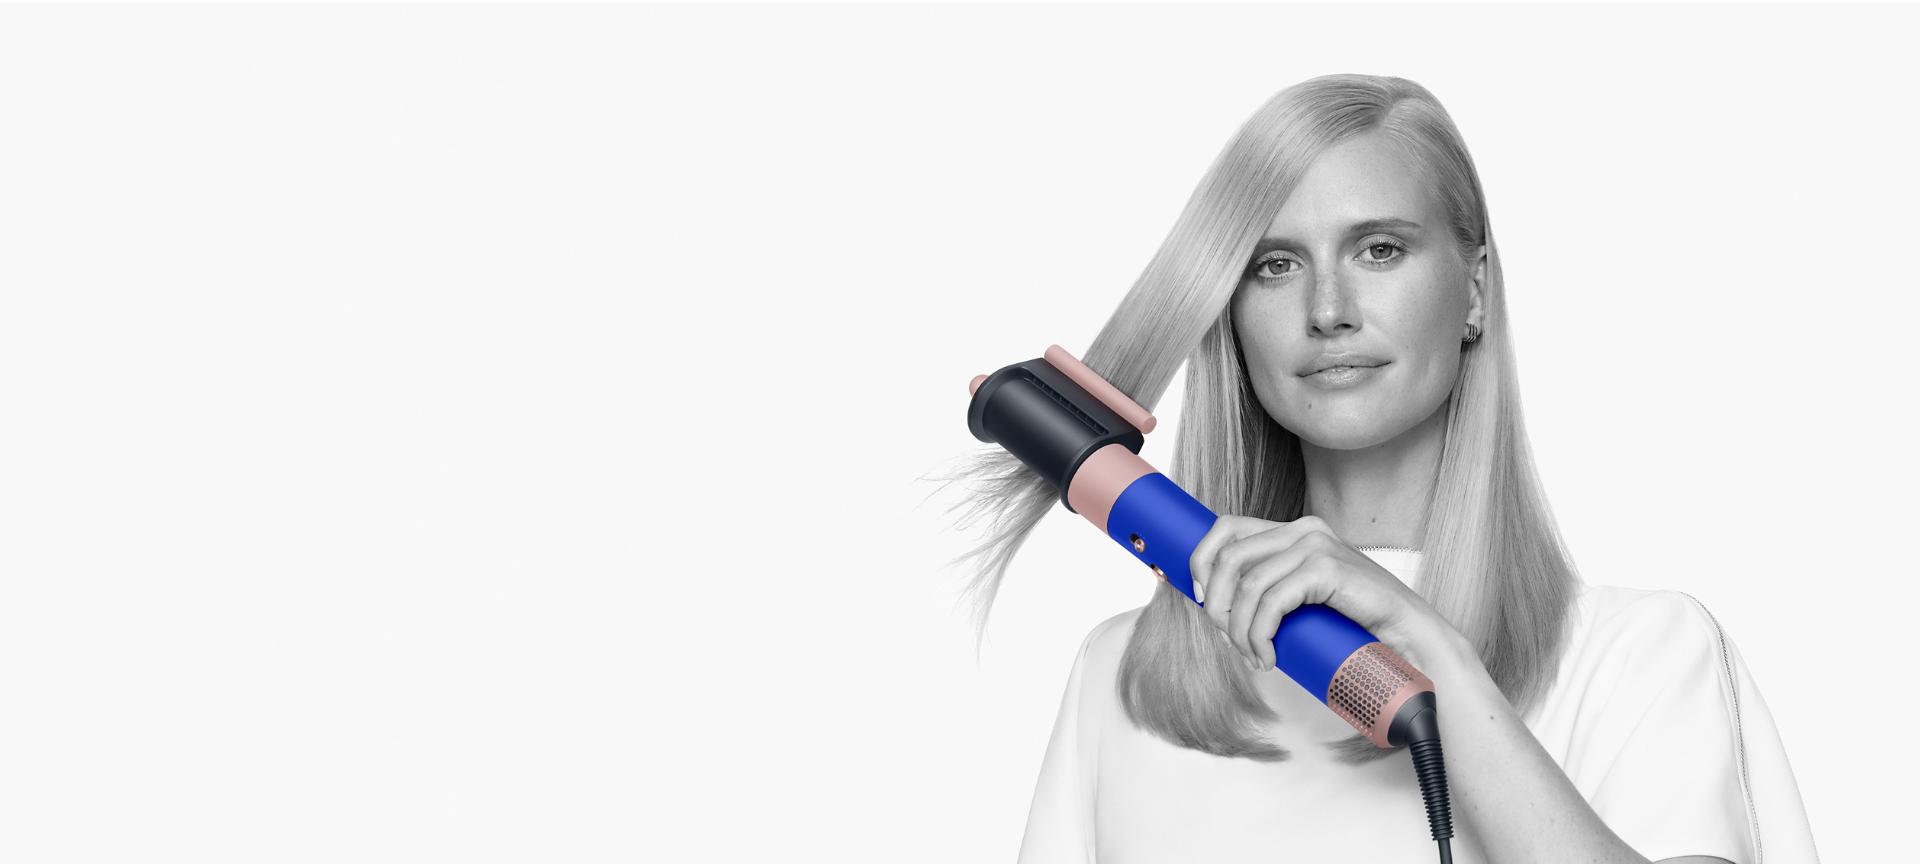 Model with type 1 hair using the Dyson coanda smoothing dryer blue blush